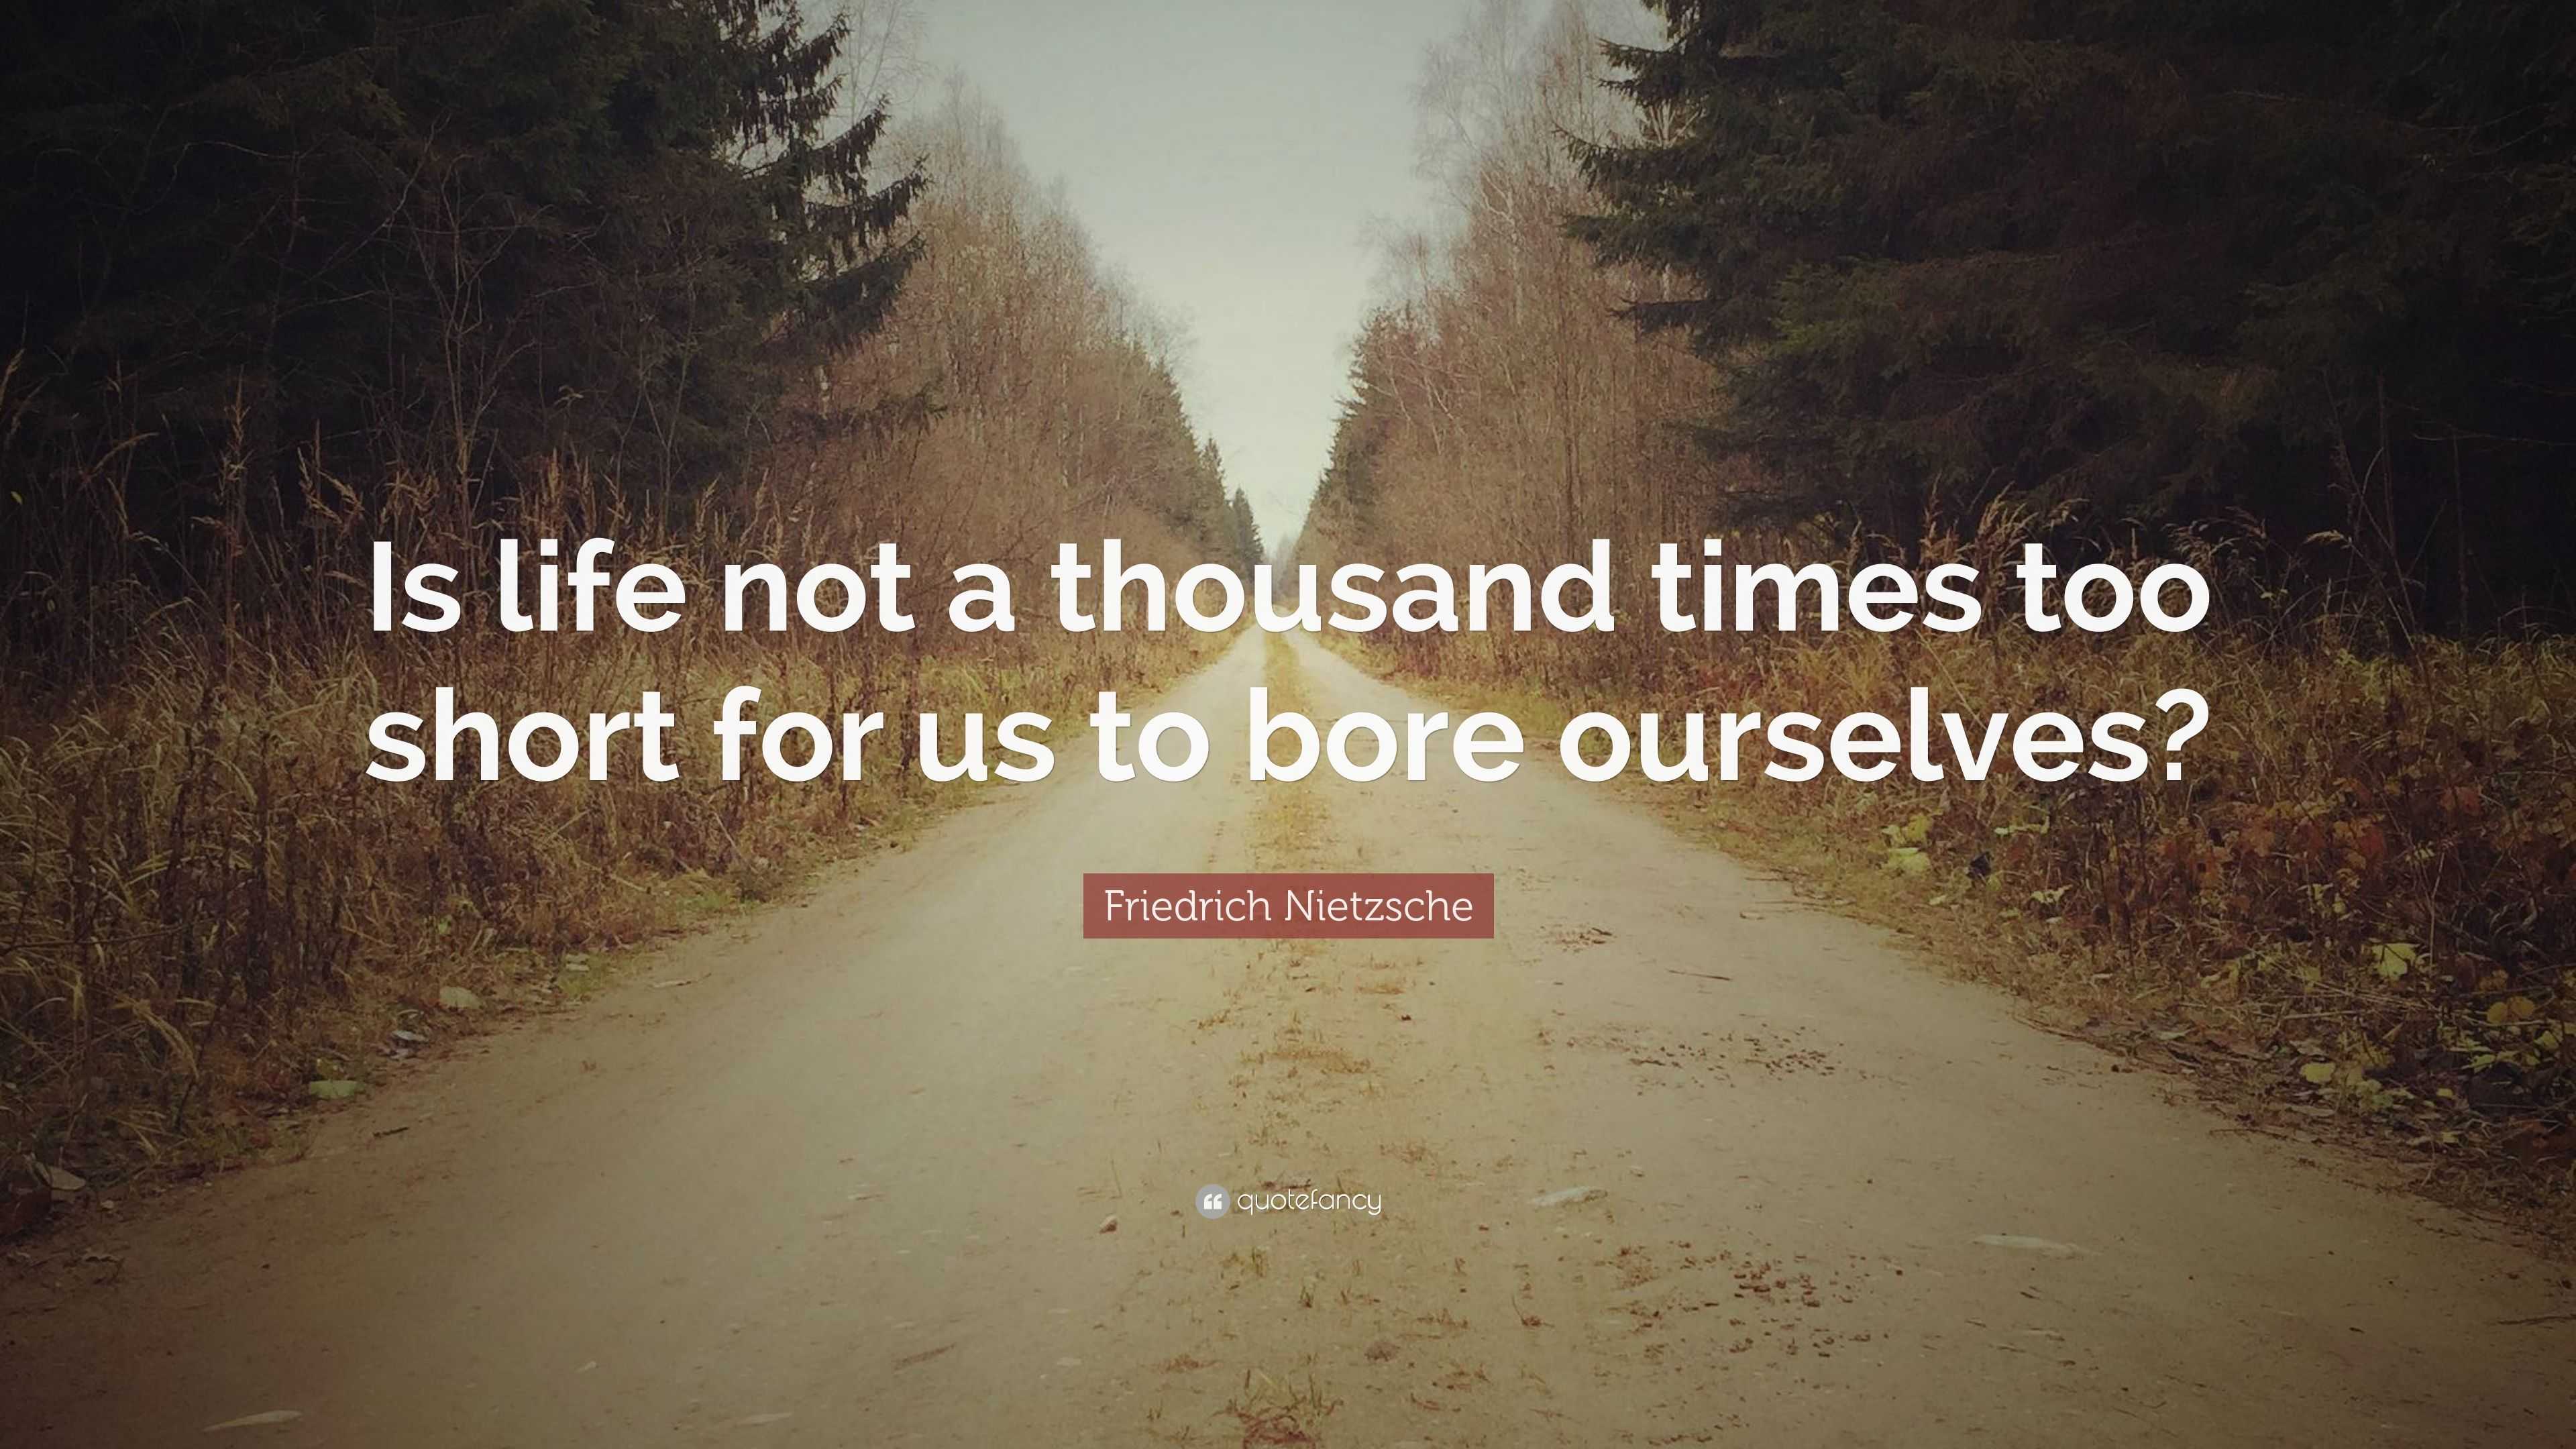 Friedrich Nietzsche Quote - Is life not a thousand times too short for us  to bore ourselves? - Philosophy Art Print for Sale by Styrman